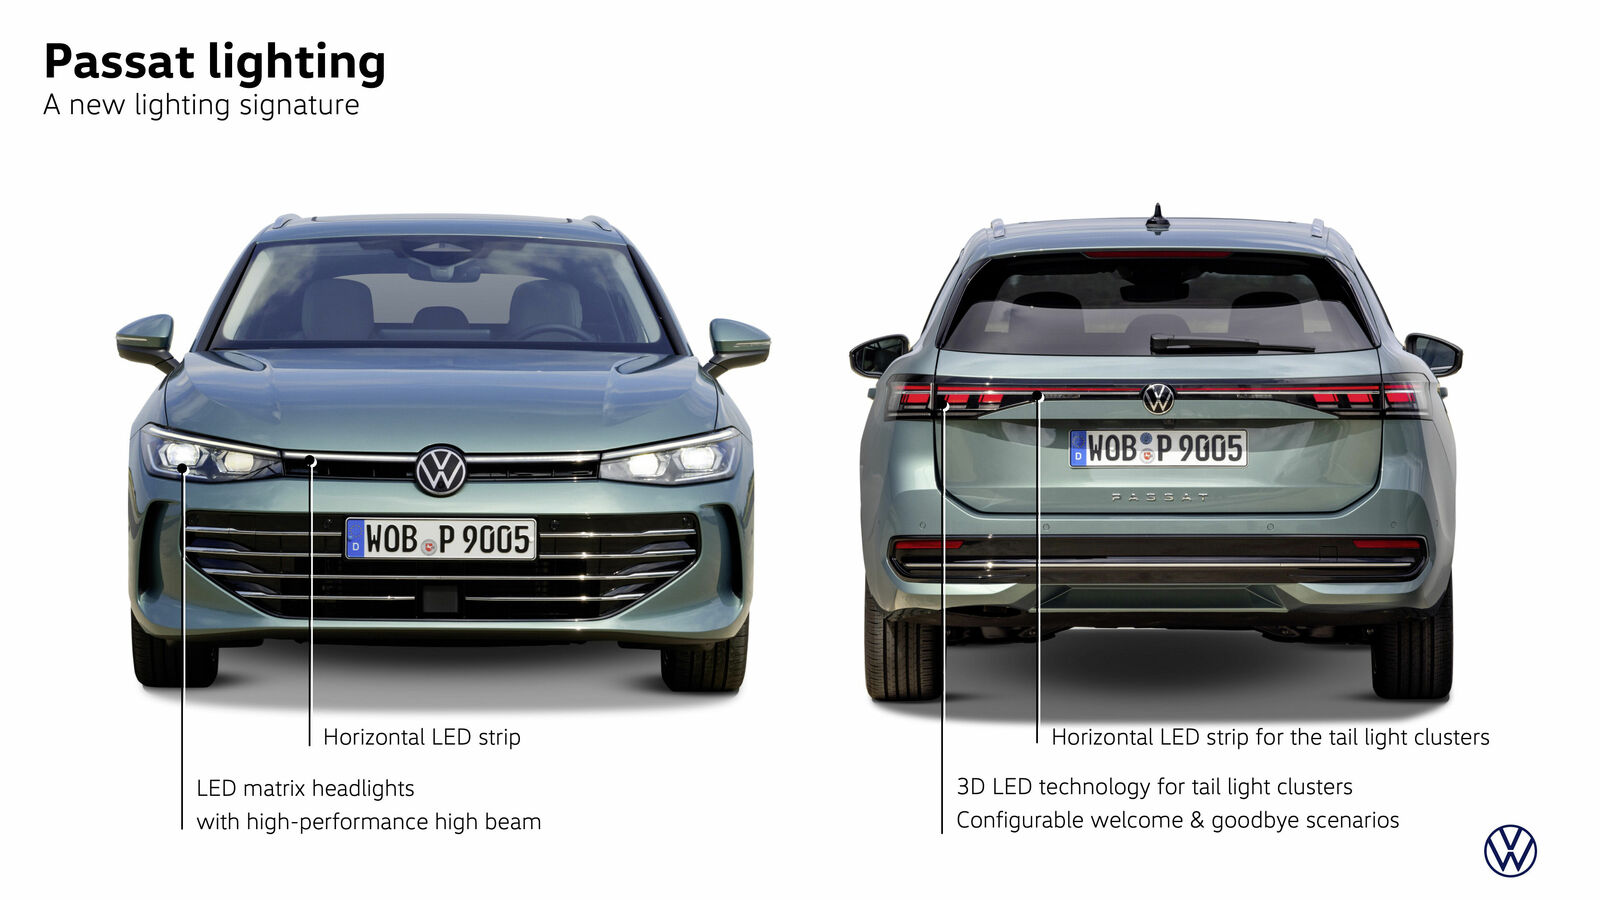 Configurator open: pre-sales of the all-new Passat have now